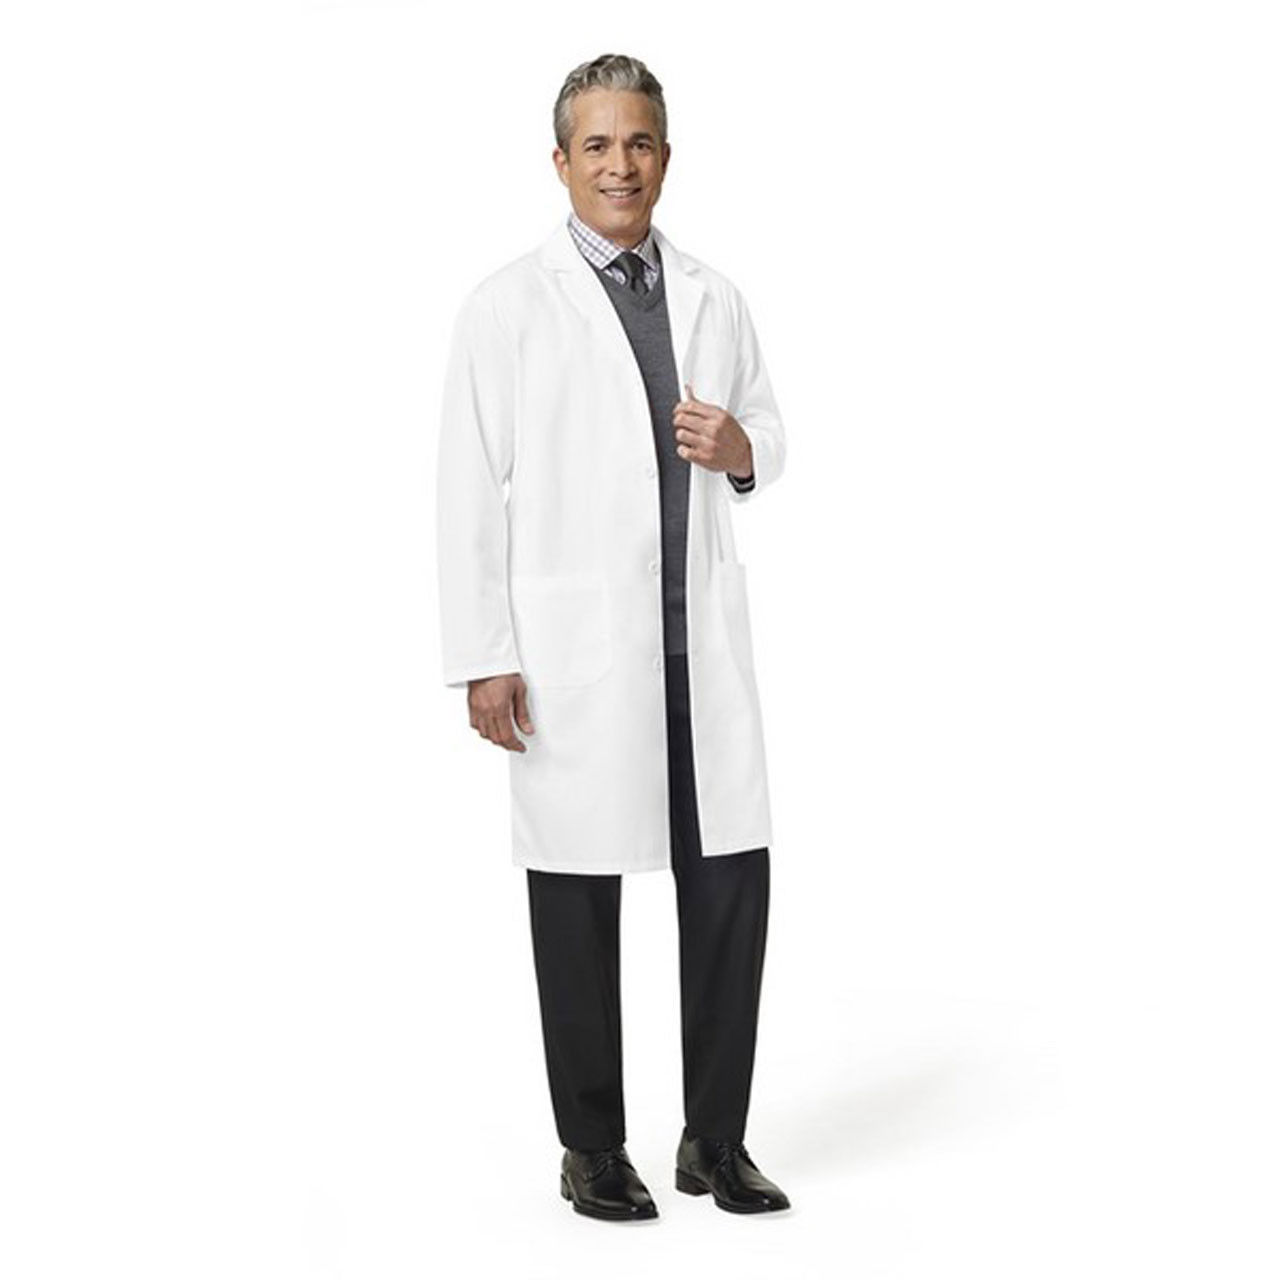 What sizes can I get if I purchase bulk lab coats?